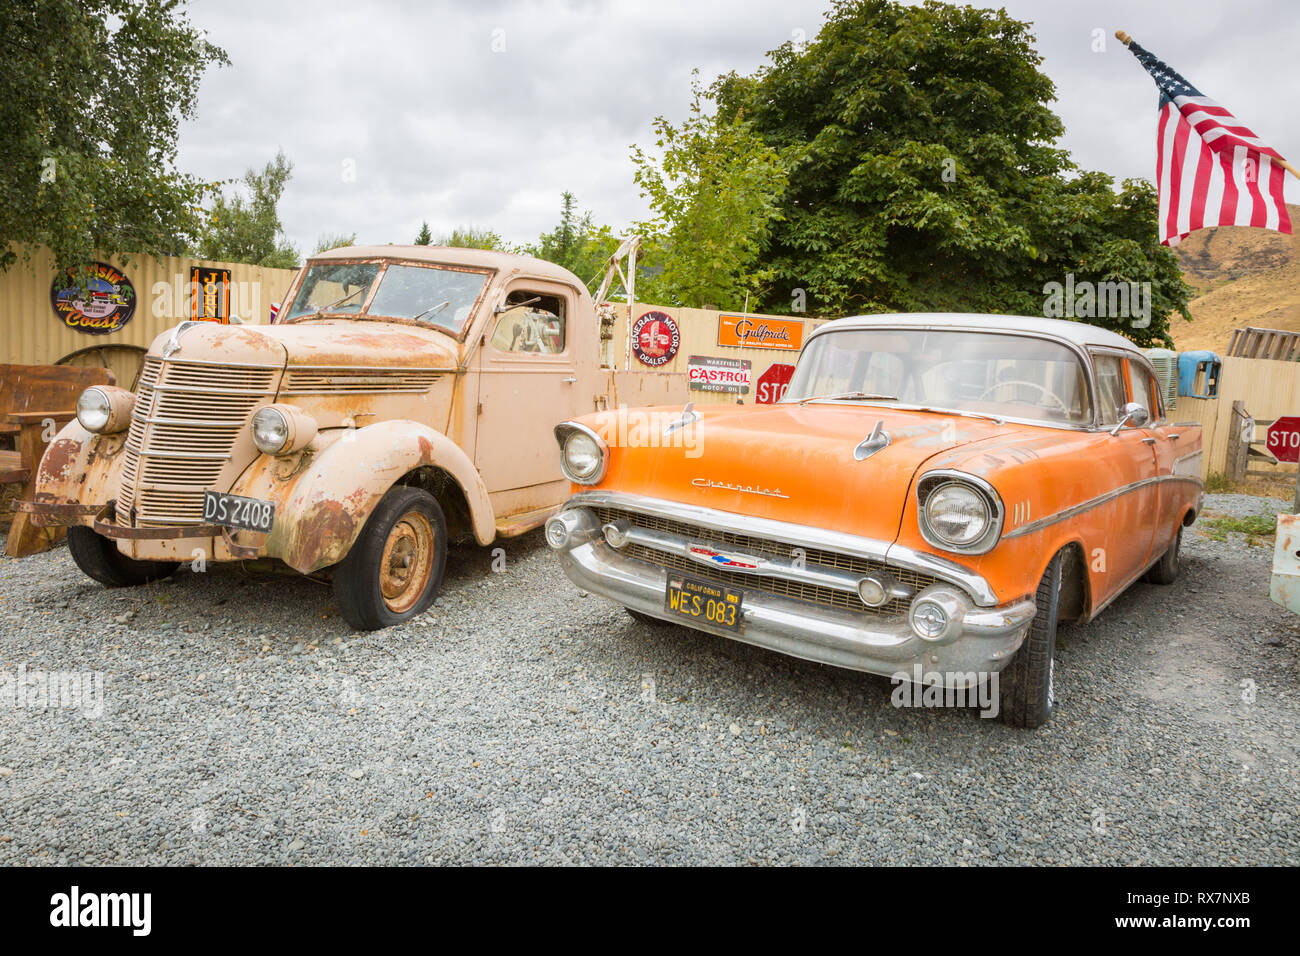 Old pickup truck and classic Chevrolet car, Burkes Pass, New Zealand Stock Photo